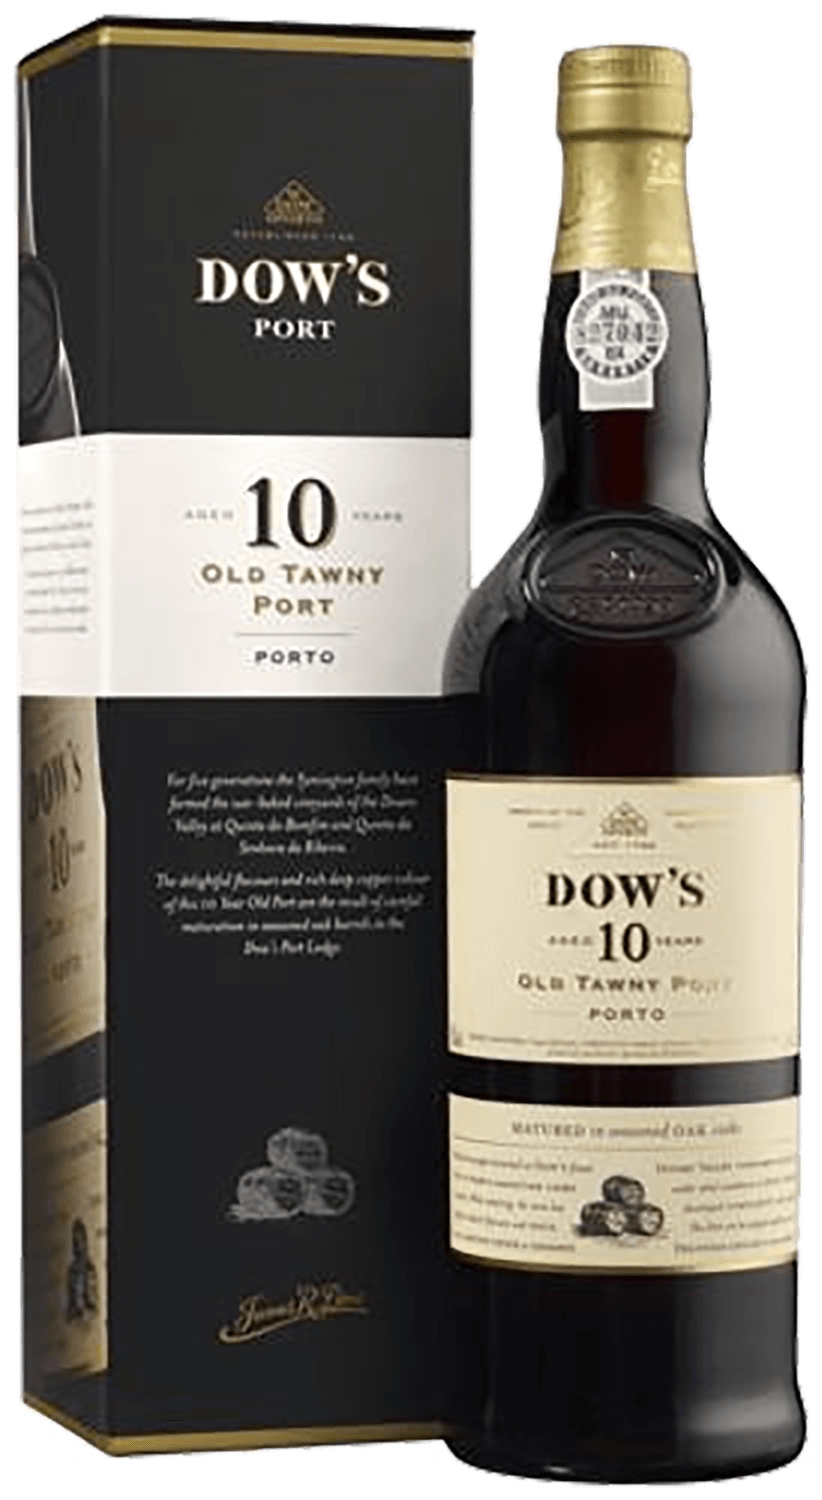 Dow's Old Tawny Port 10 years (gift box)